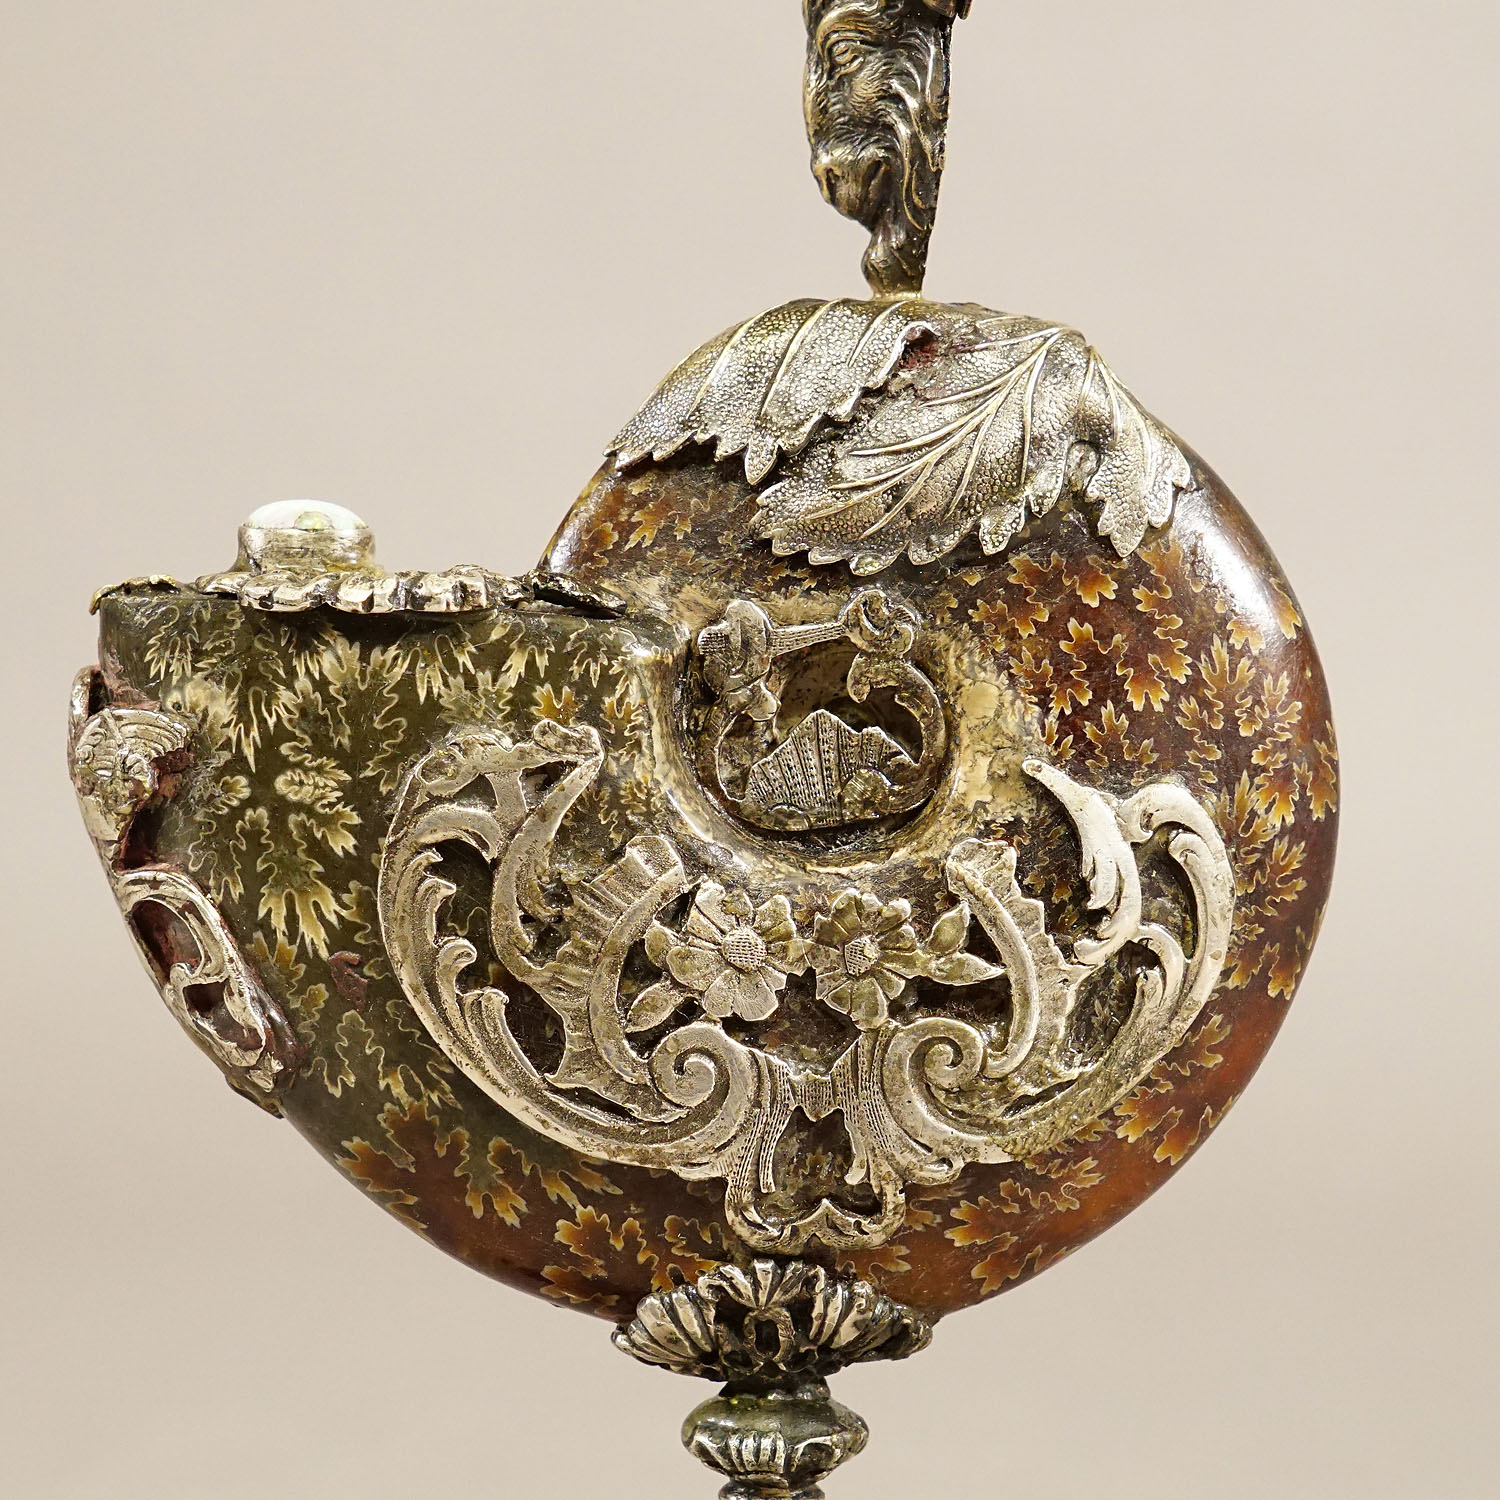 Antique Wunderkammer Installation of an Ammonite with Silver Mounting